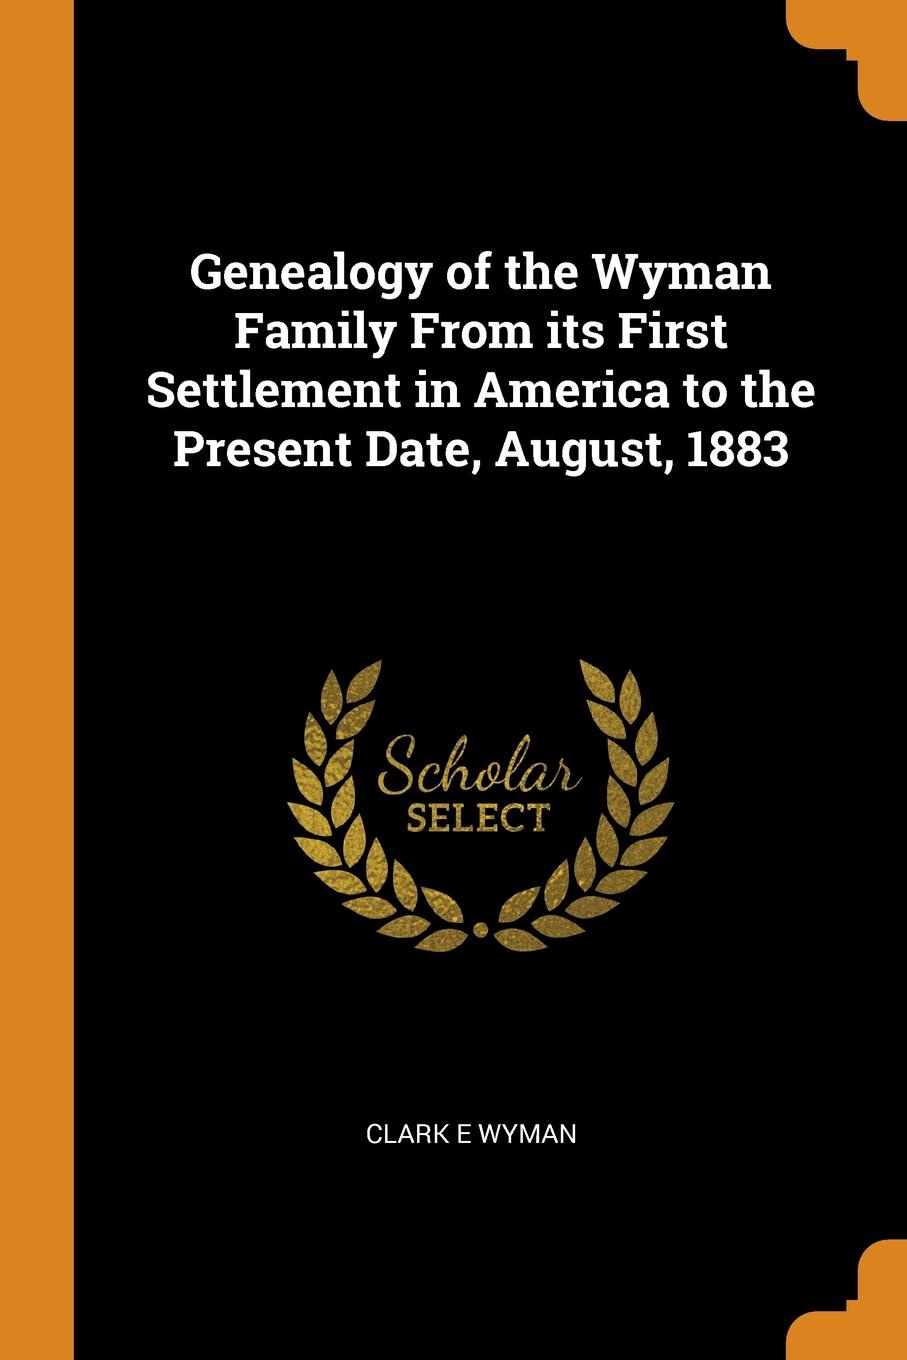 Genealogy of the Wyman Family From its First Settlement in America to the Present Date, August, 1883